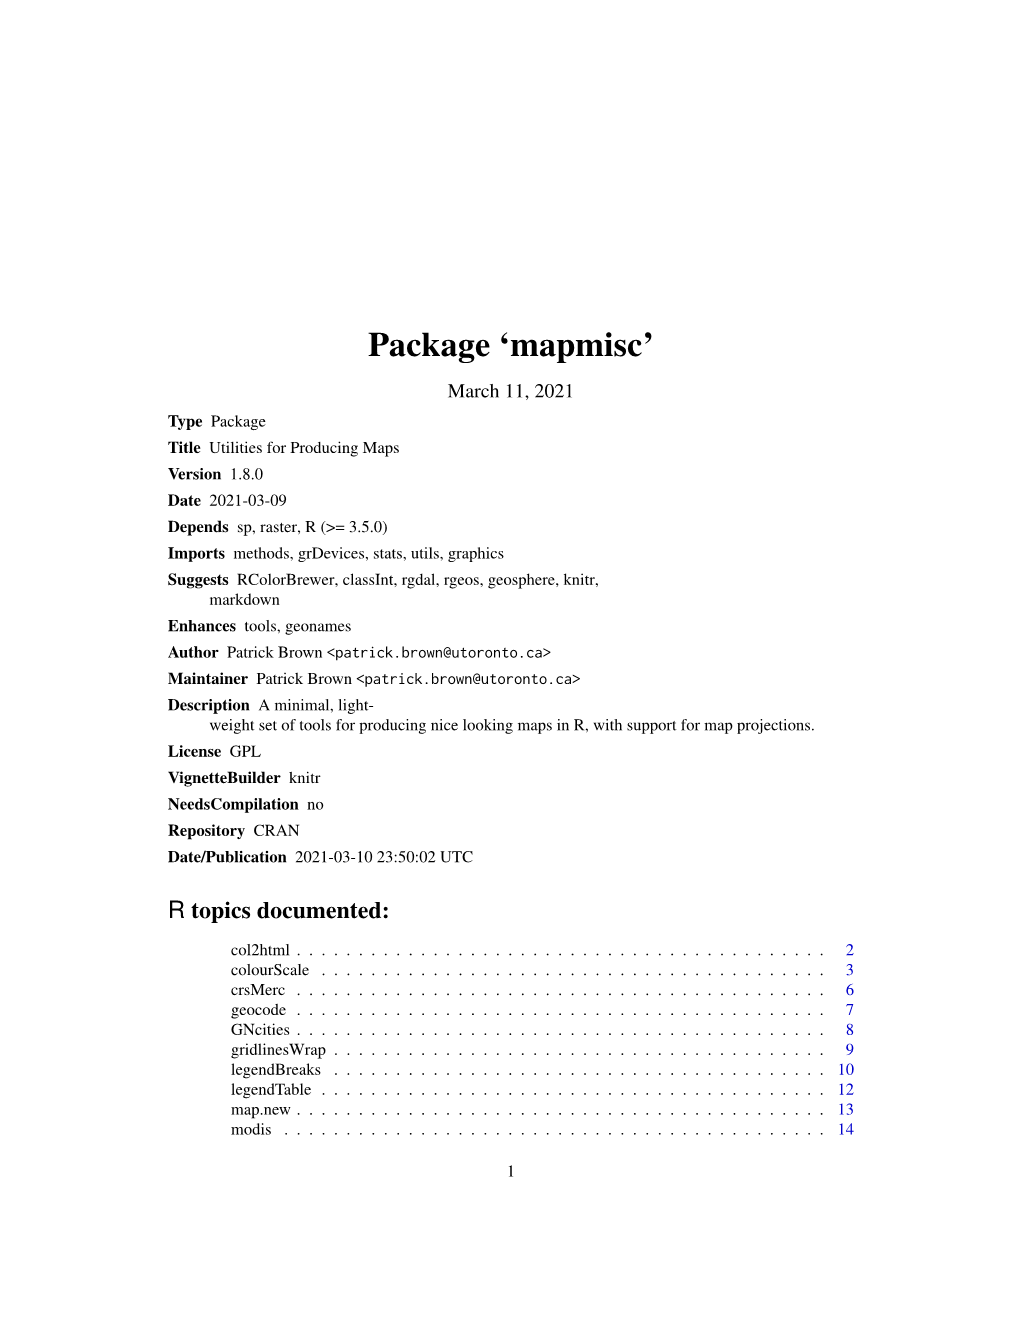 Package 'Mapmisc'